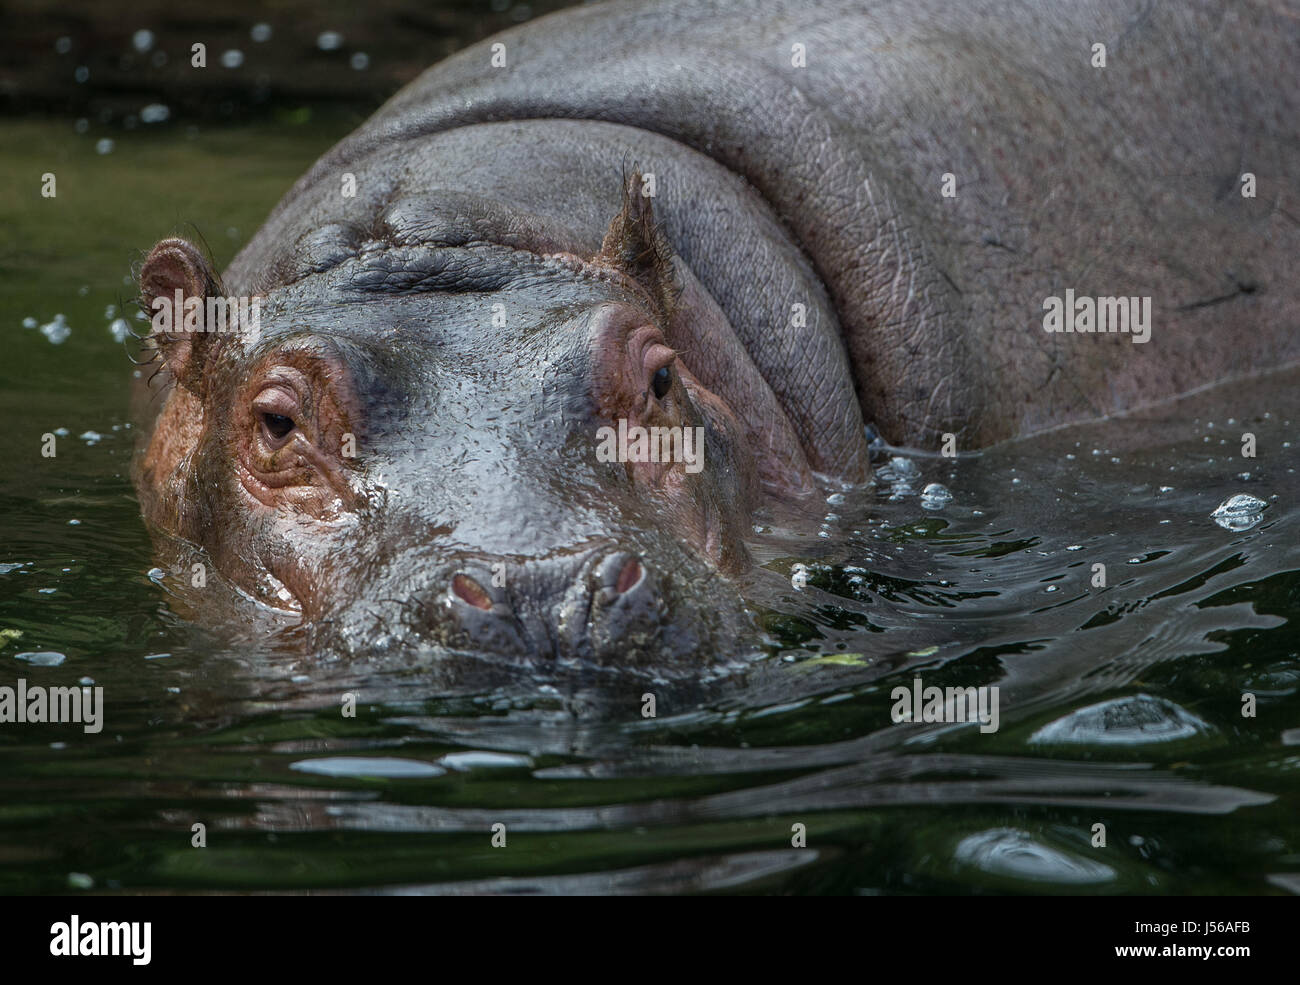 Hanover, Germany. 17th May, 2017. Pumeza the hippopotamus in its enclosure in the zoo in Hanover, Germany, 17 May 2017. The zoo is celebrating the first birthday of the animal. It received a special treat in the shape of the number one made up of salad and grass. Photo: Silas Stein/dpa/Alamy Live News Stock Photo